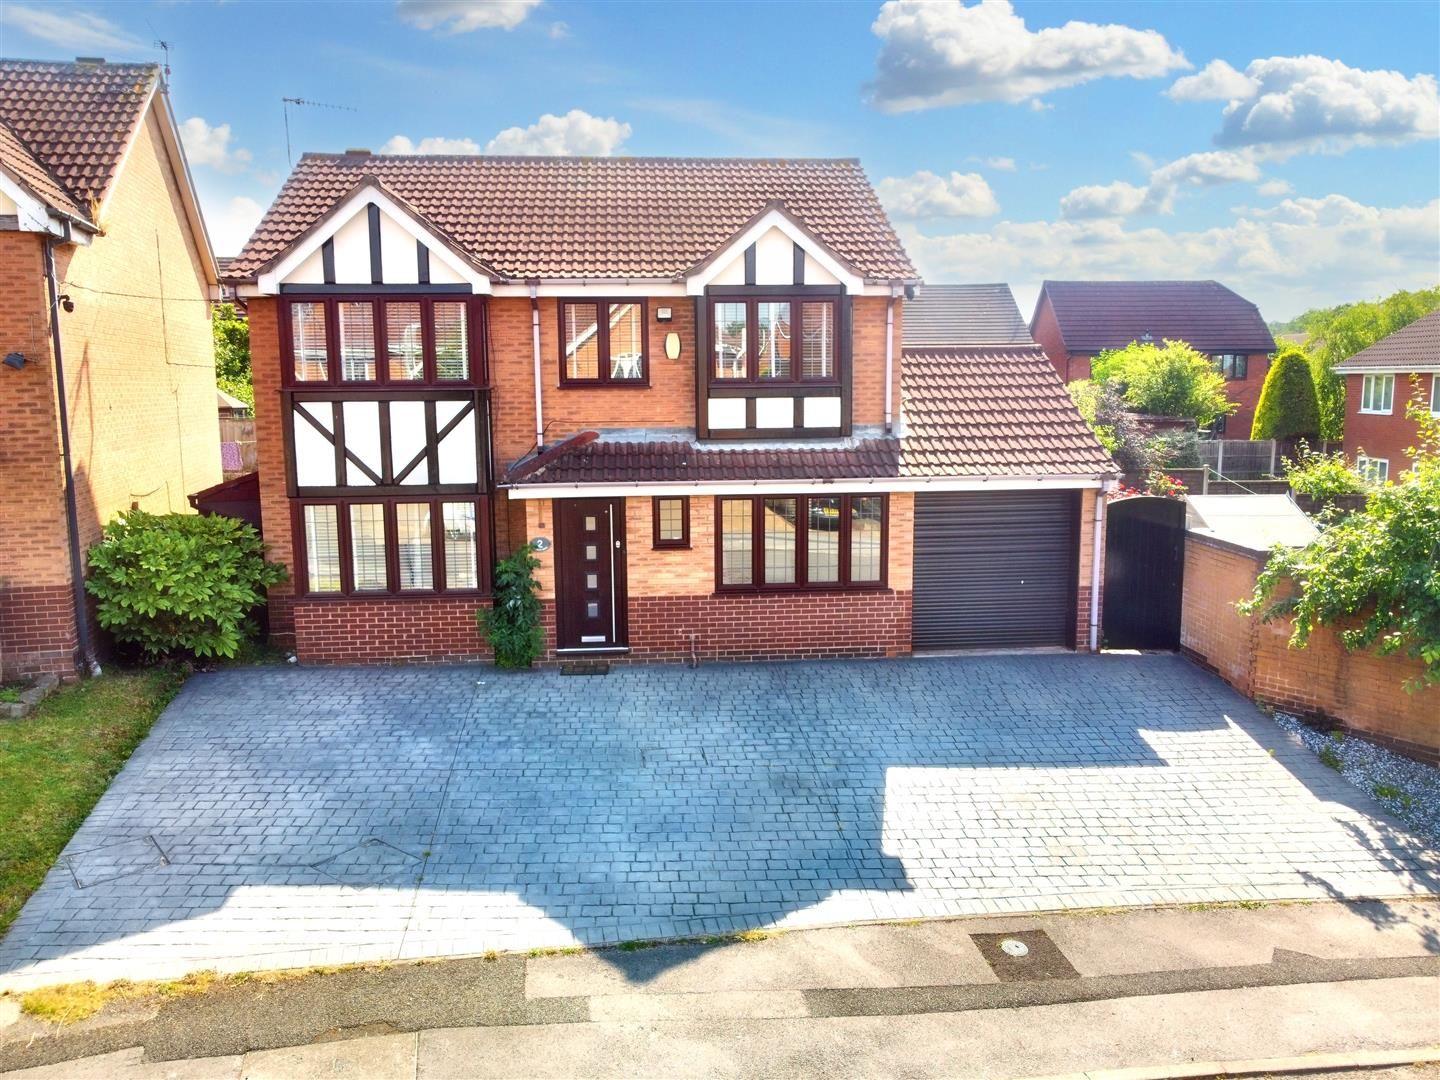 Northolt Drive, Nuthall, NG16 1QX